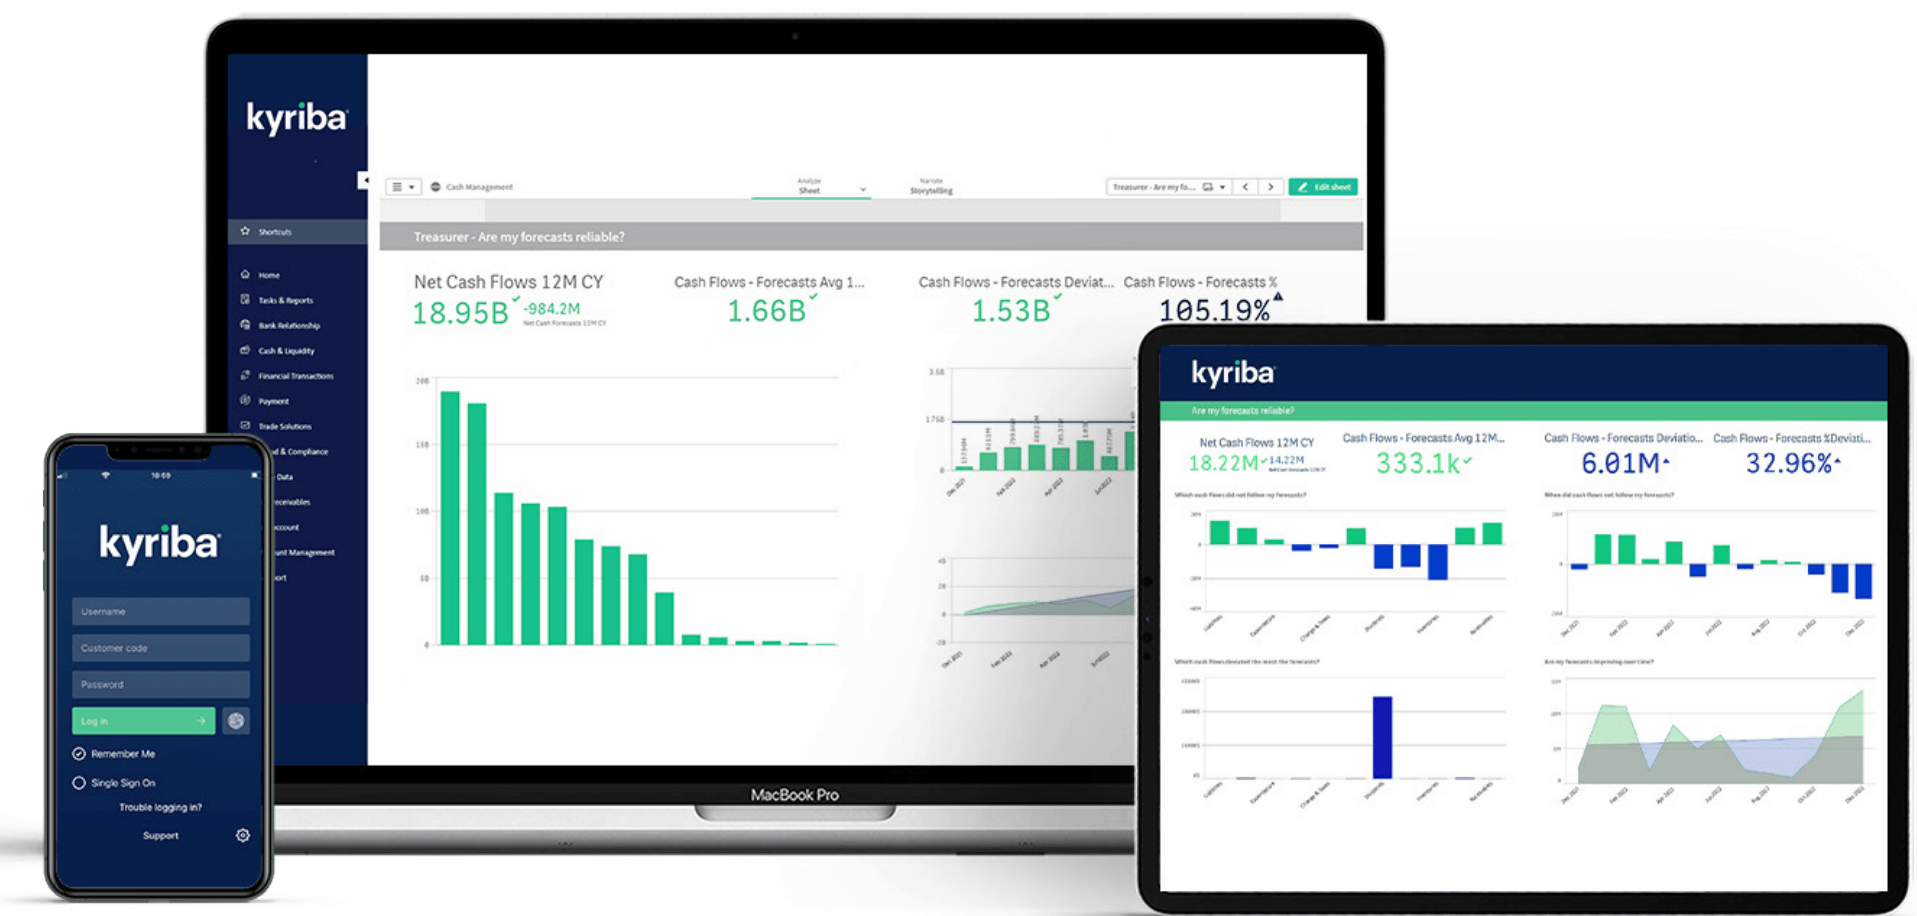 Kyriba Analytics is available on both PC and mobile devices - Treasury analytics on-the-go